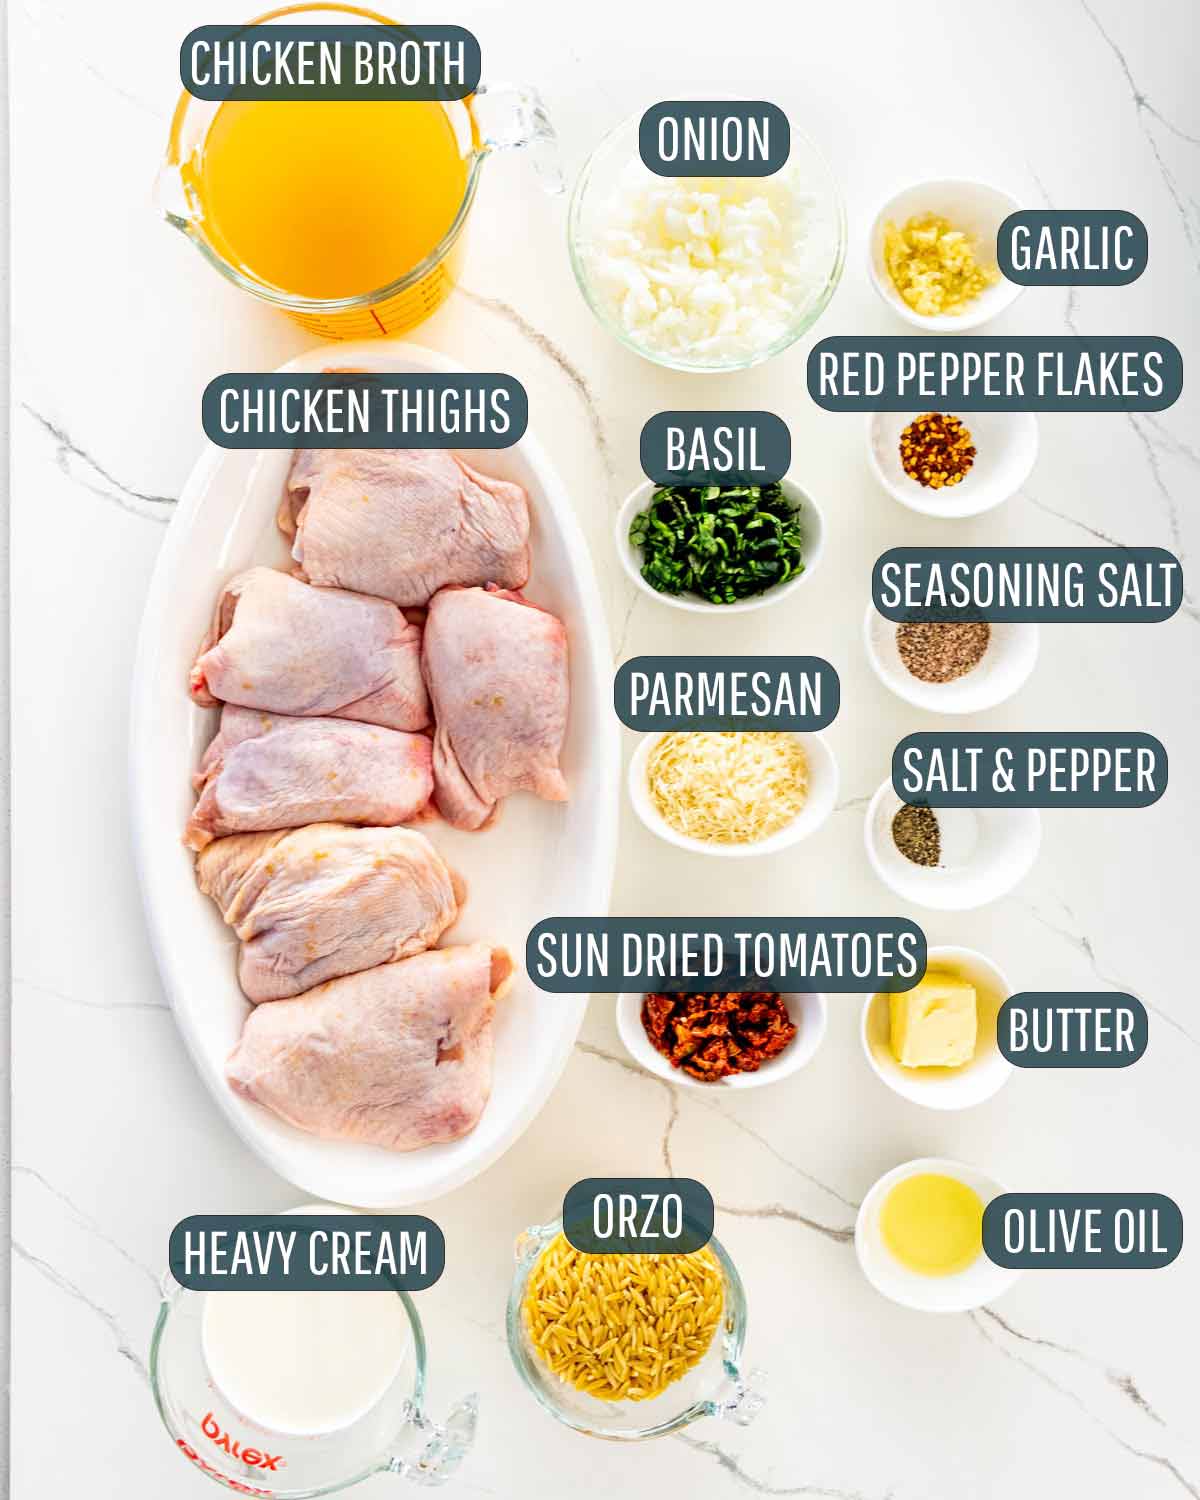 ingredients needed to make chicken and orzo in one pot.